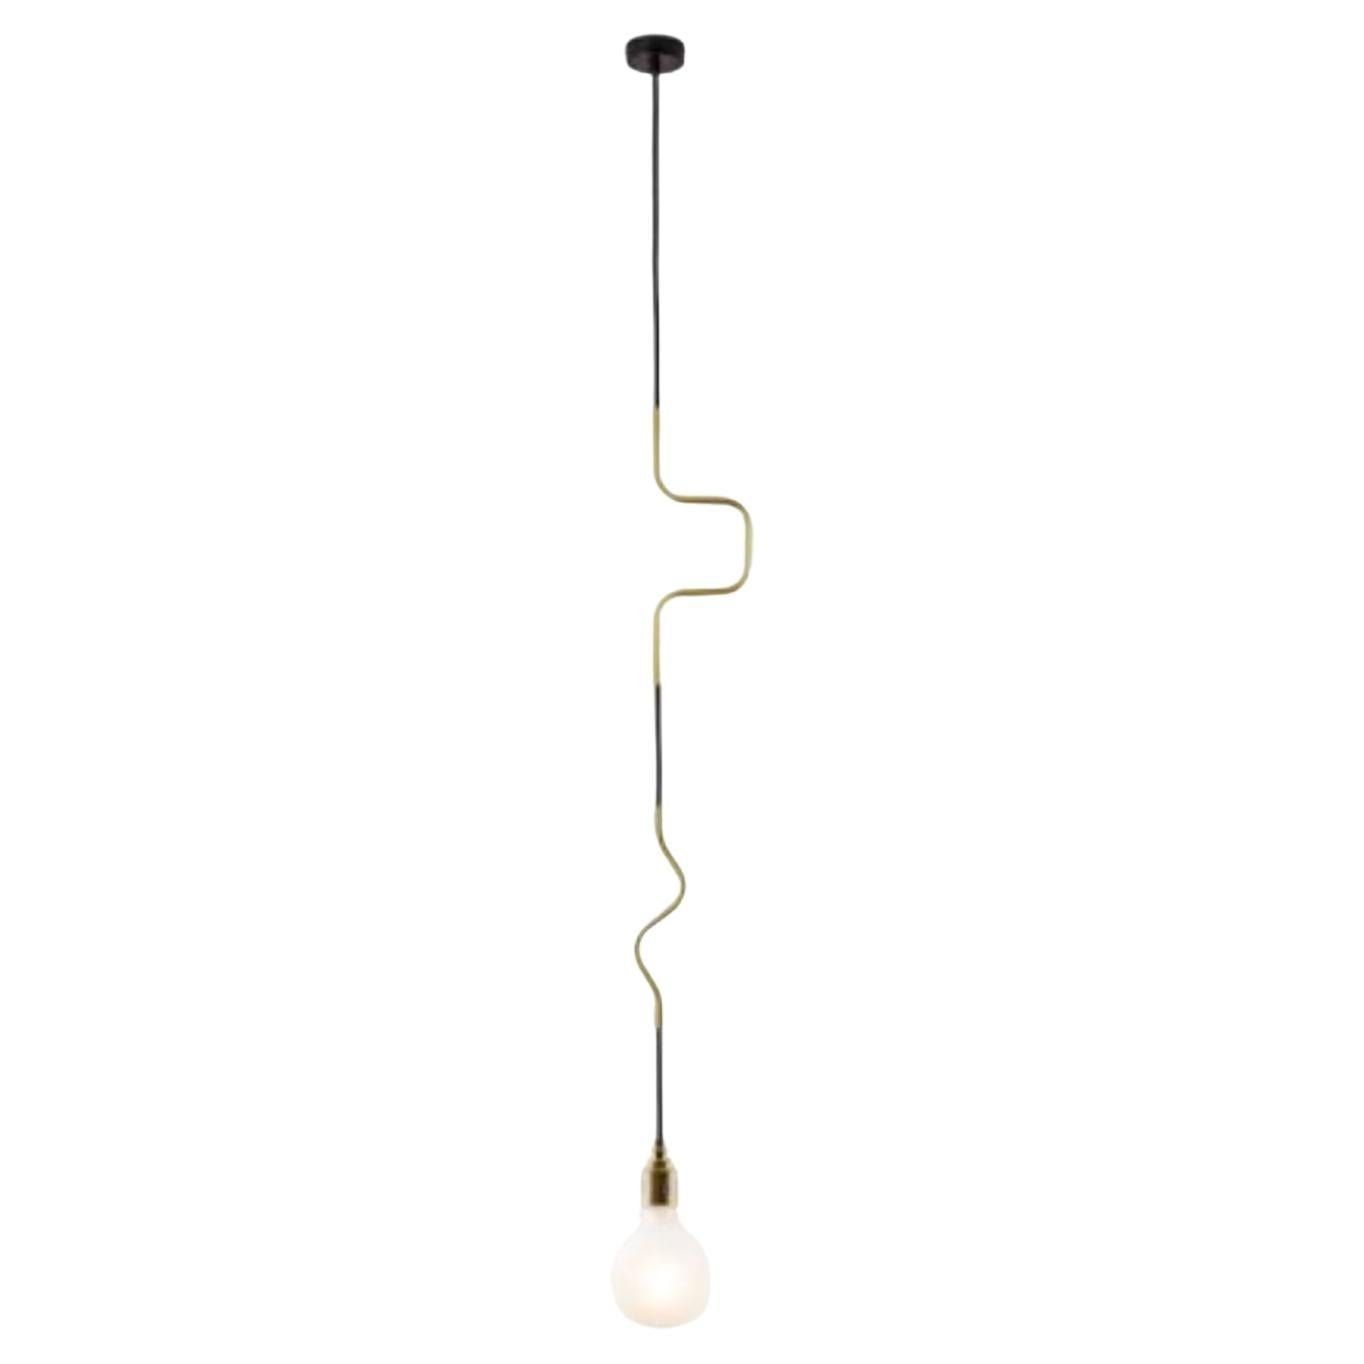 Set of 2 jewellery single and double pendant lights by Volker Haug.
Dimensions: 
Single: W 10 x H 30 cm 
Double: W 10 x H 60 cm 
Triple: W 10 x H 90 cm 
Materials: Aluminium ‘S’ or ‘U’ bends
Cord: Fabric braided
Minimum suspension: Single